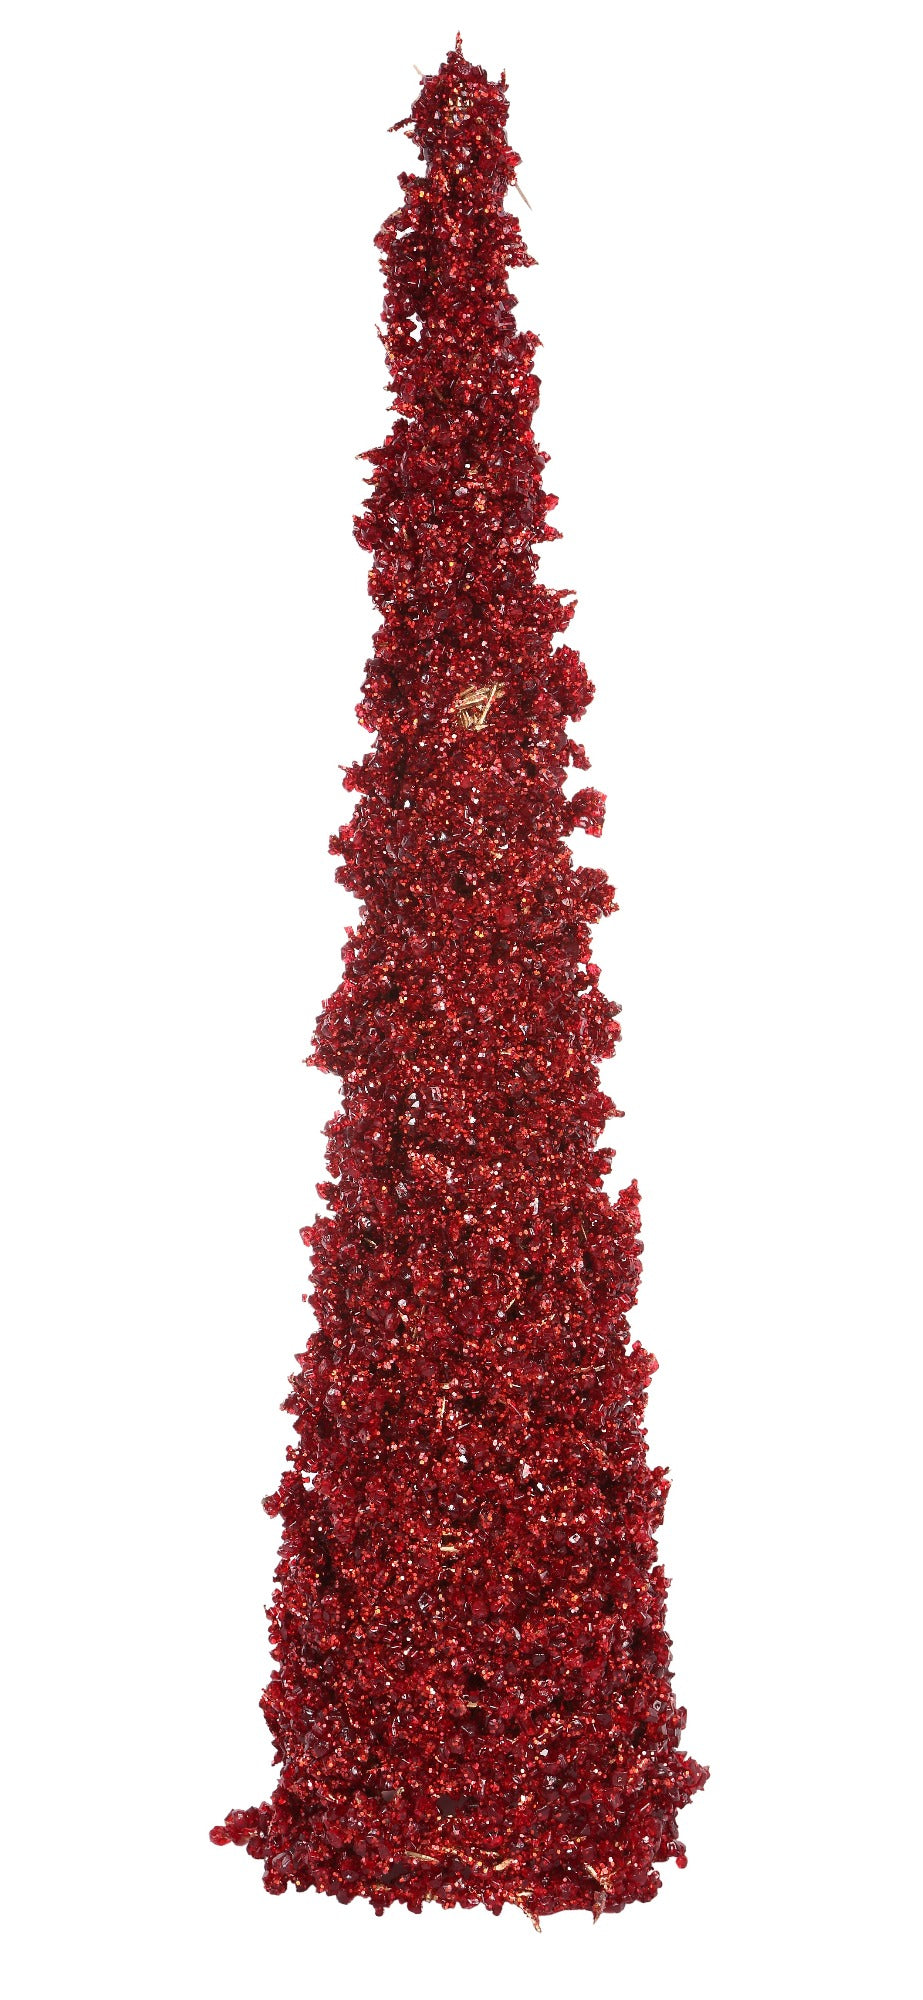 red Christmas cone tree holiday decor